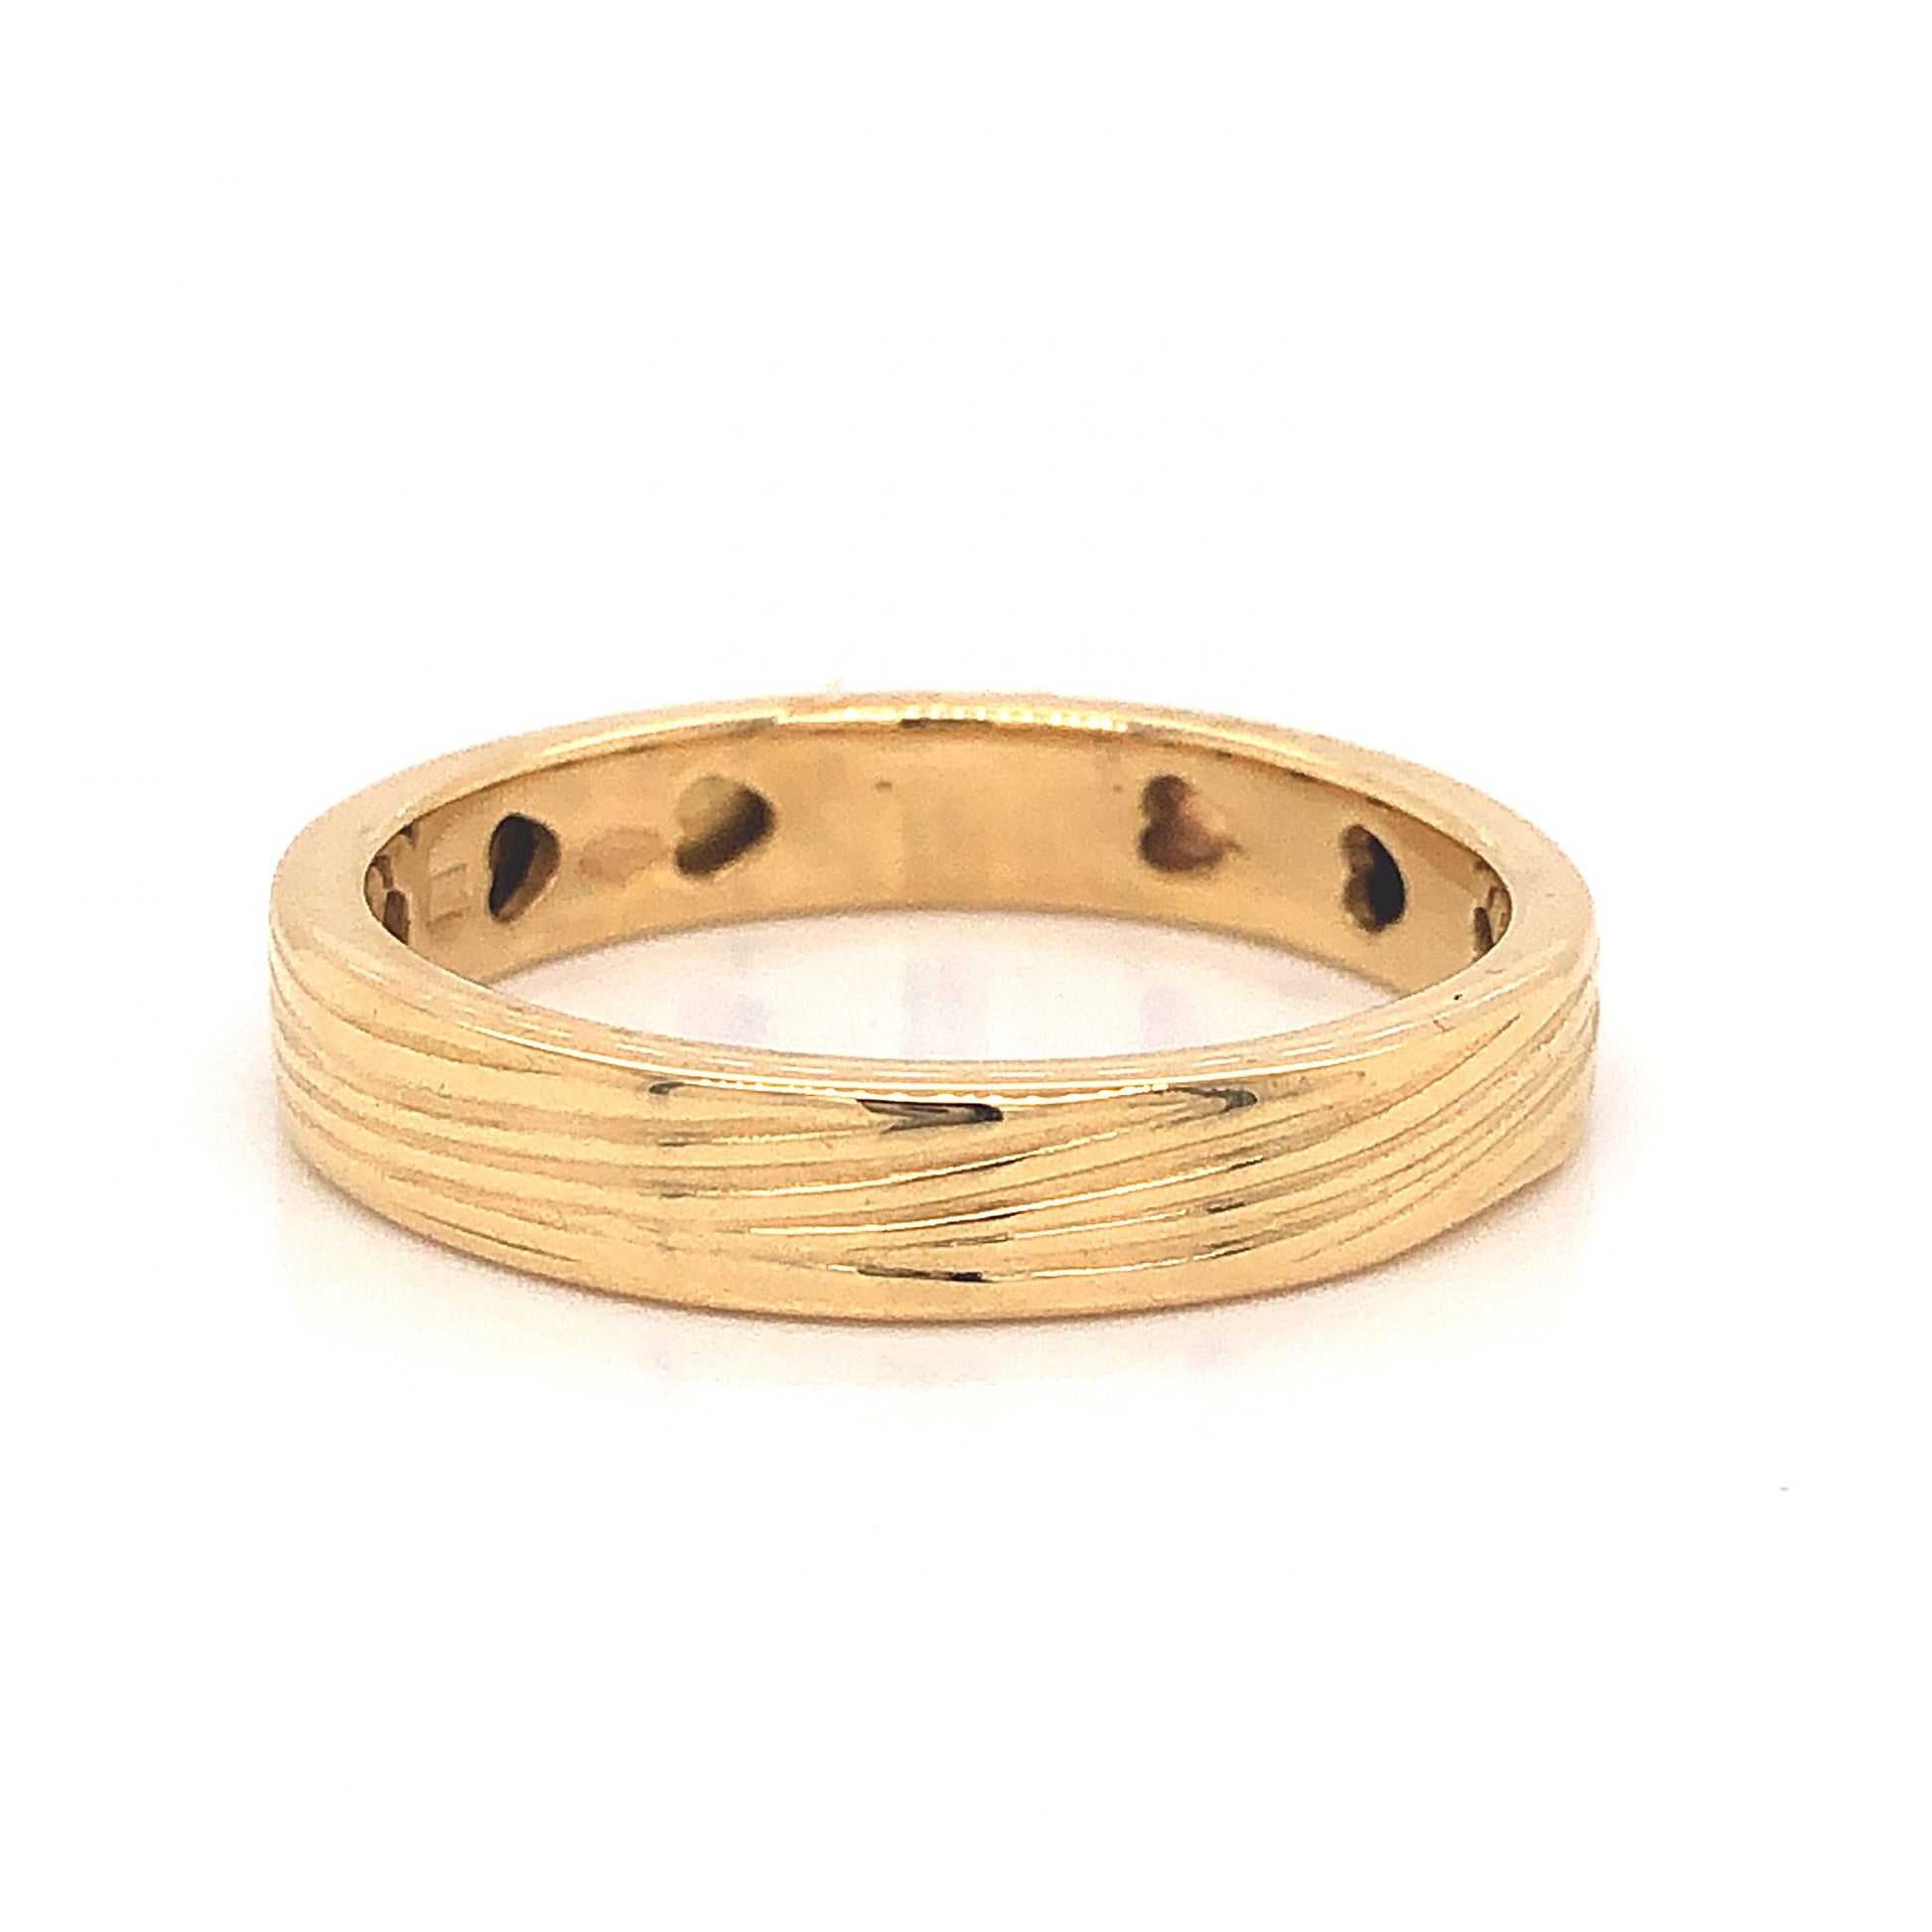 Men's Mid-Century Engraved Wedding Band in 18K Yellow GoldComposition: Platinum Ring Size: 11 Total Gram Weight: 6.1 g Inscription: 3457 AL MM 750
      